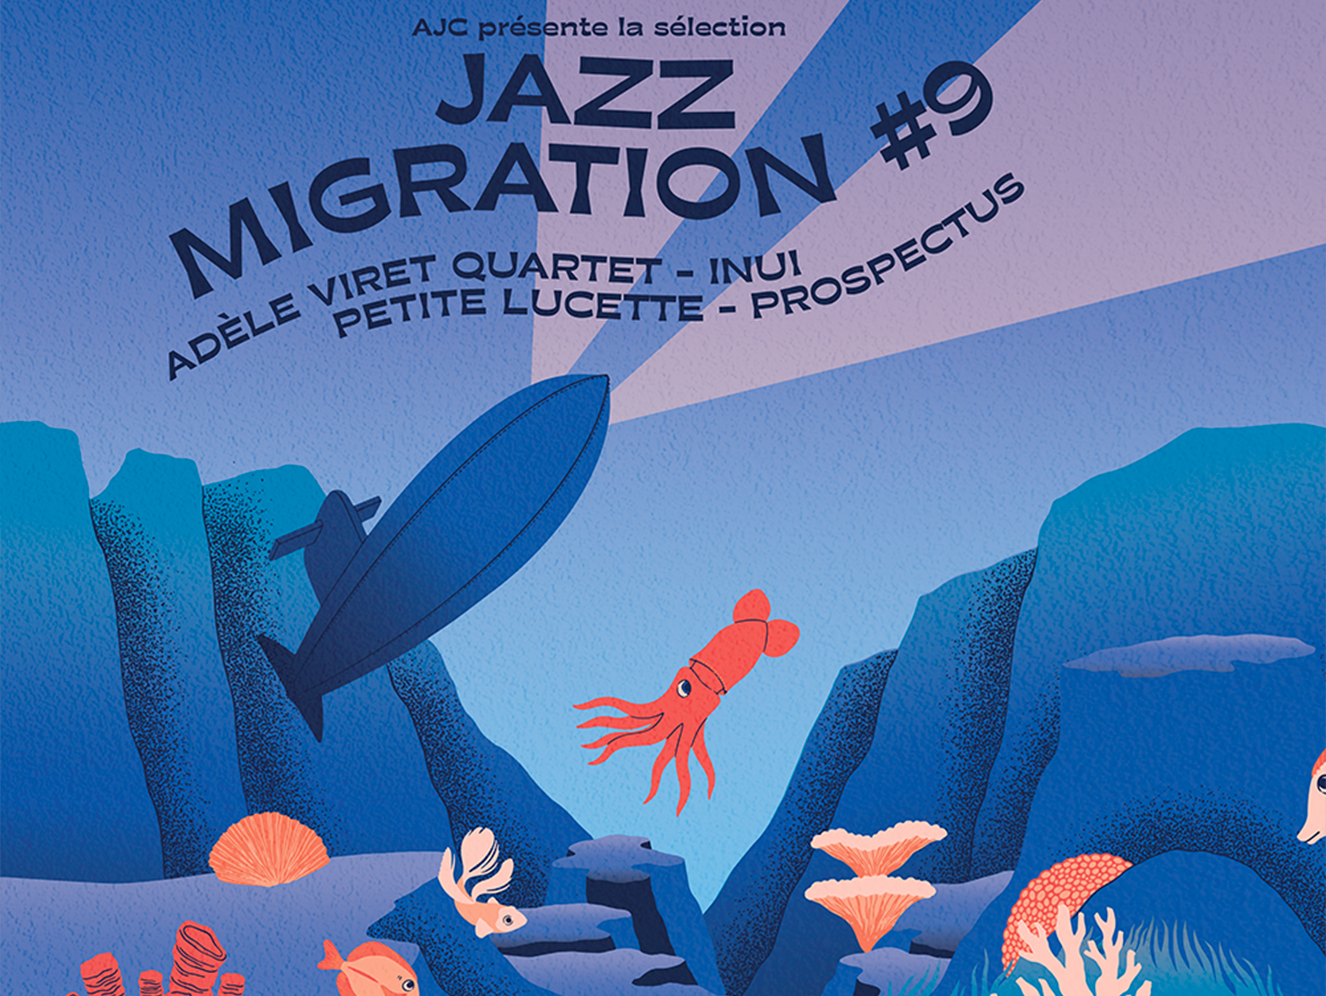 Read more about the article Jazz Migration #9 : the laureates!